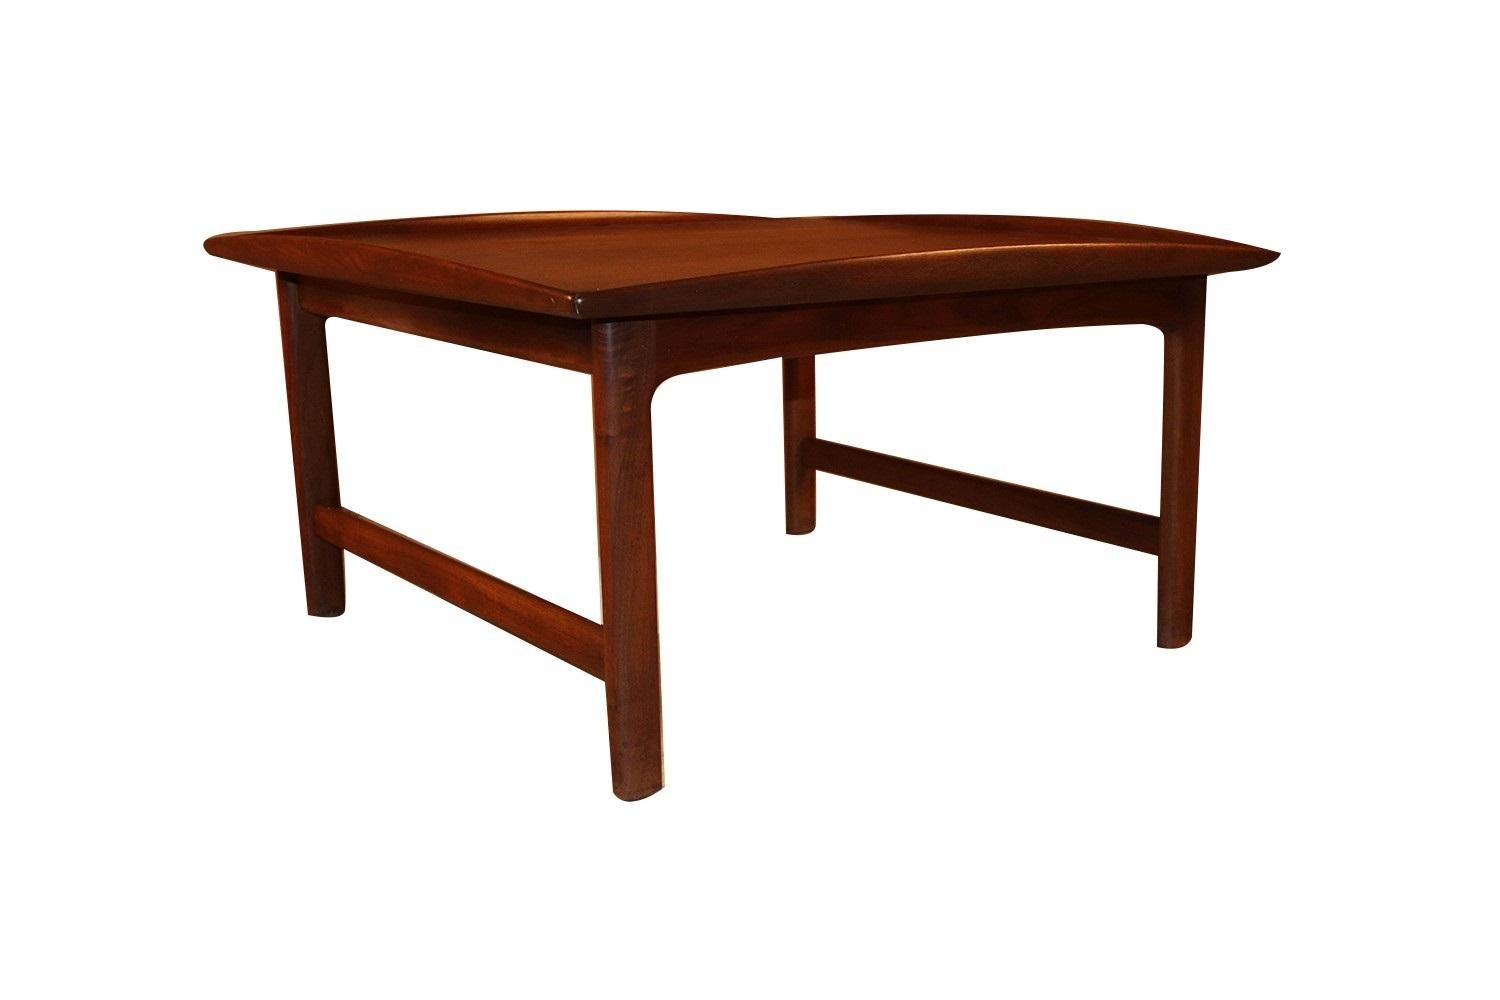 A wonderful turned edge teak coffee table designed by Folke Ohlsson, made by Dux in Sweden. Features a gorgeous wood grain, manufacturer’s name stamped on the underside DUX. This table is exemplary of Danish Modern, Eames era elegance, gorgeous